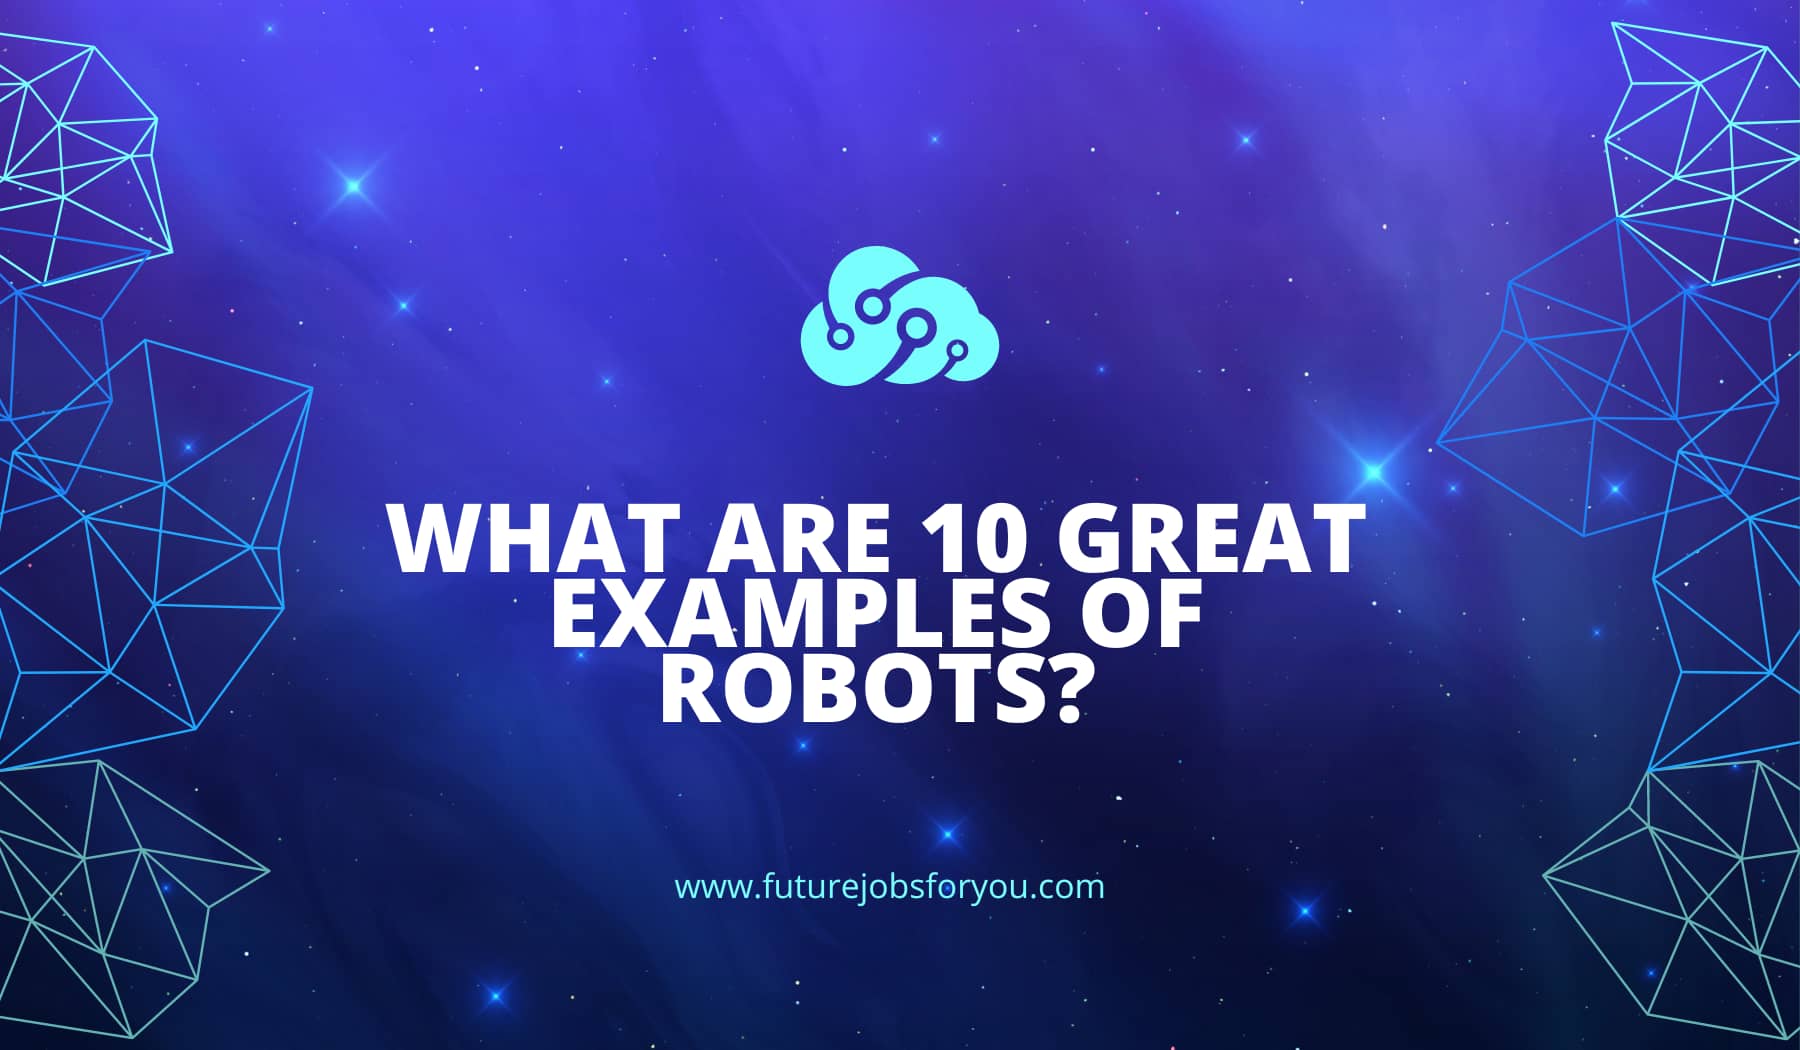 What are 10 great examples of robots?